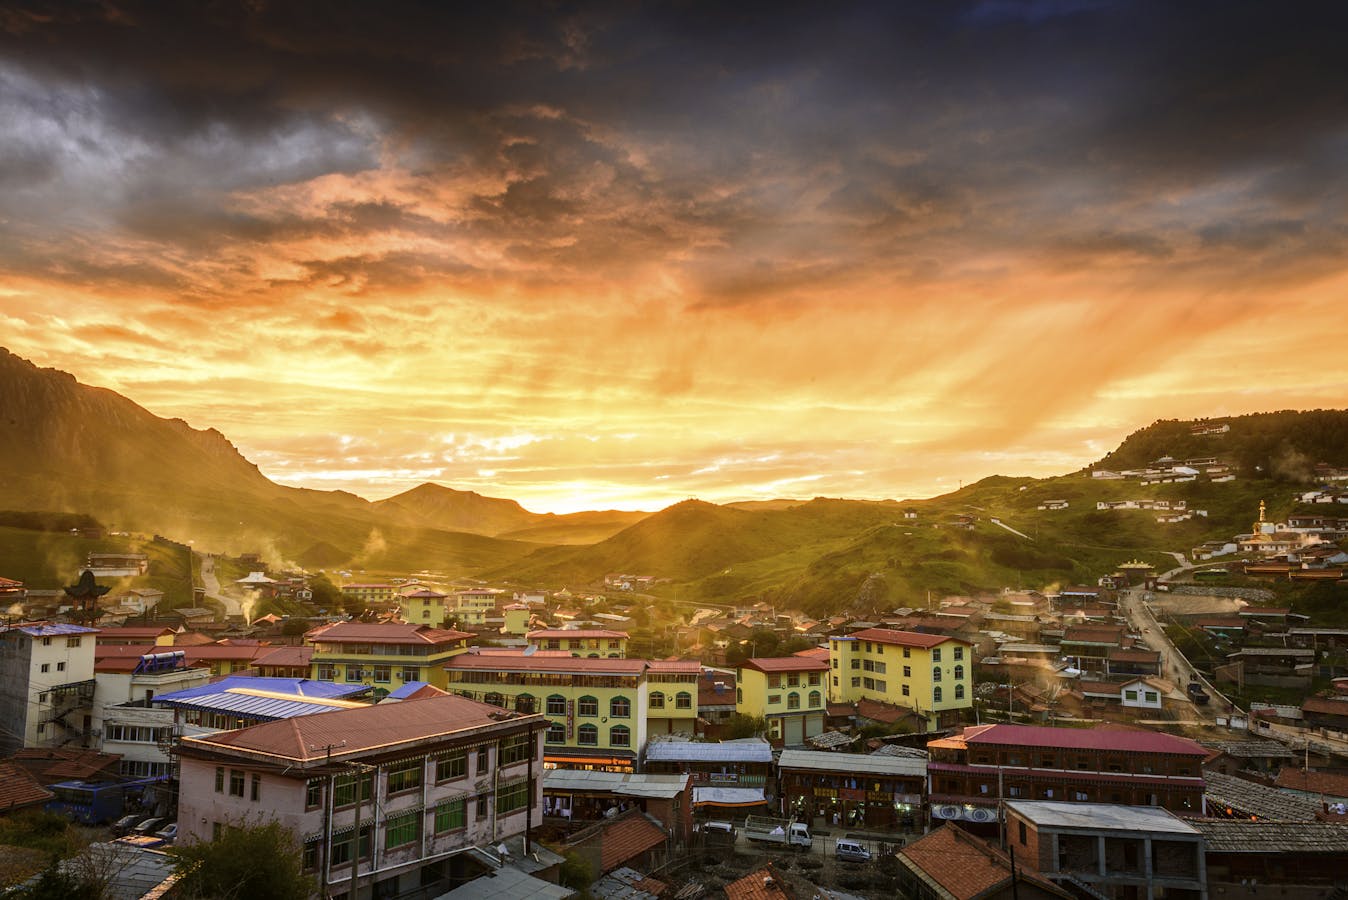 Skyline of a small rural town with rolling hills in Tibet during sunset.